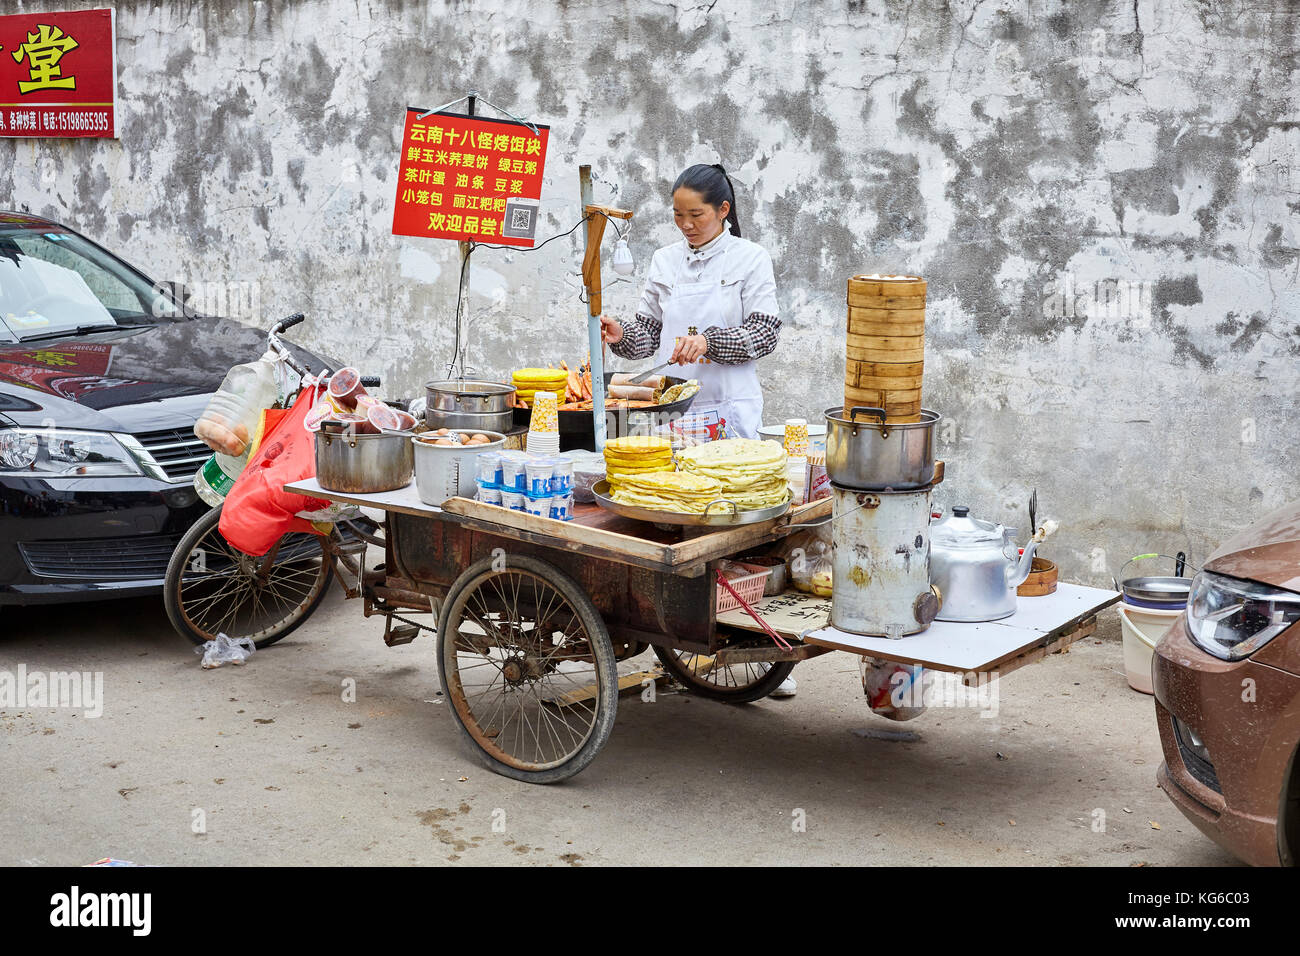 Lijiang, Yunnan, China - September 27, 2017: Woman prepares and sells breakfast food from street stall. Payment via QR code becomes very common in Chi Stock Photo